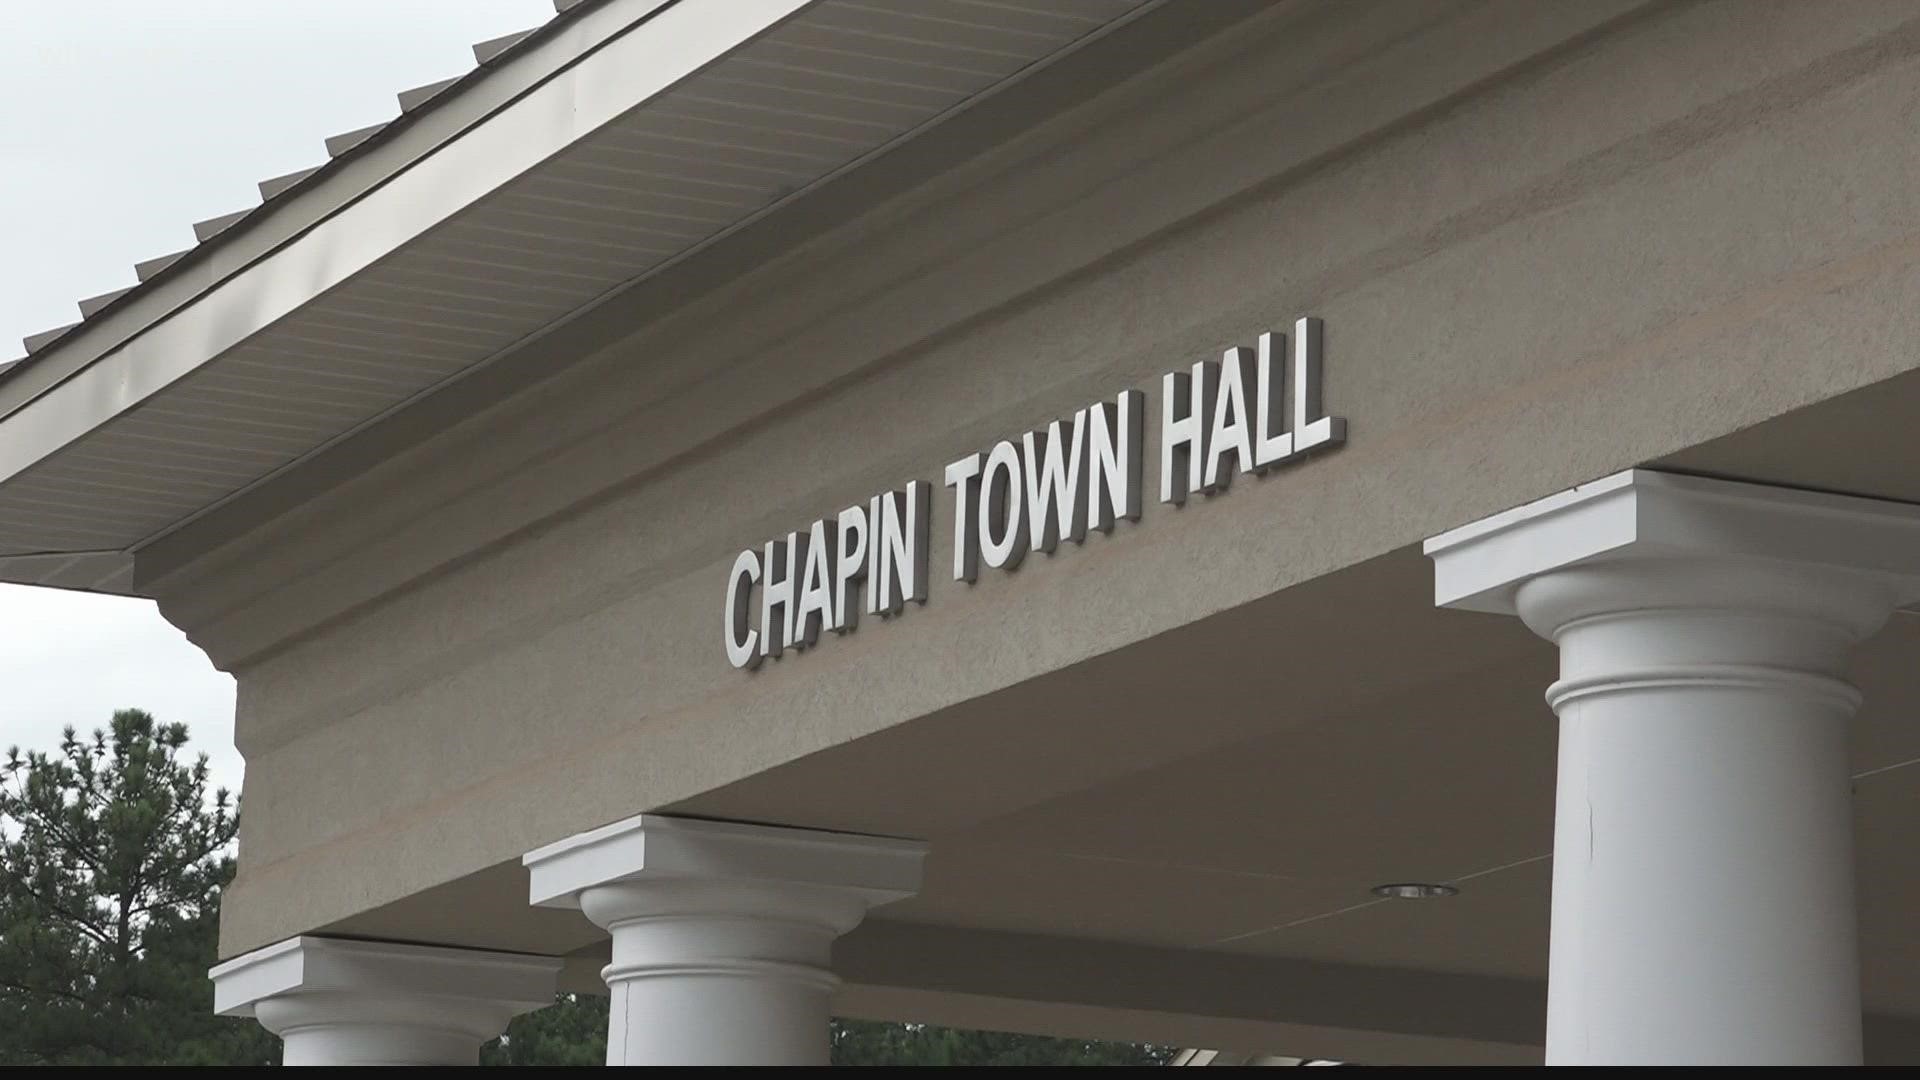 News 19's Peyton Lewis has more on why the Chapin is creating a town administrator role and what the mayor and council are hoping this does for their community.